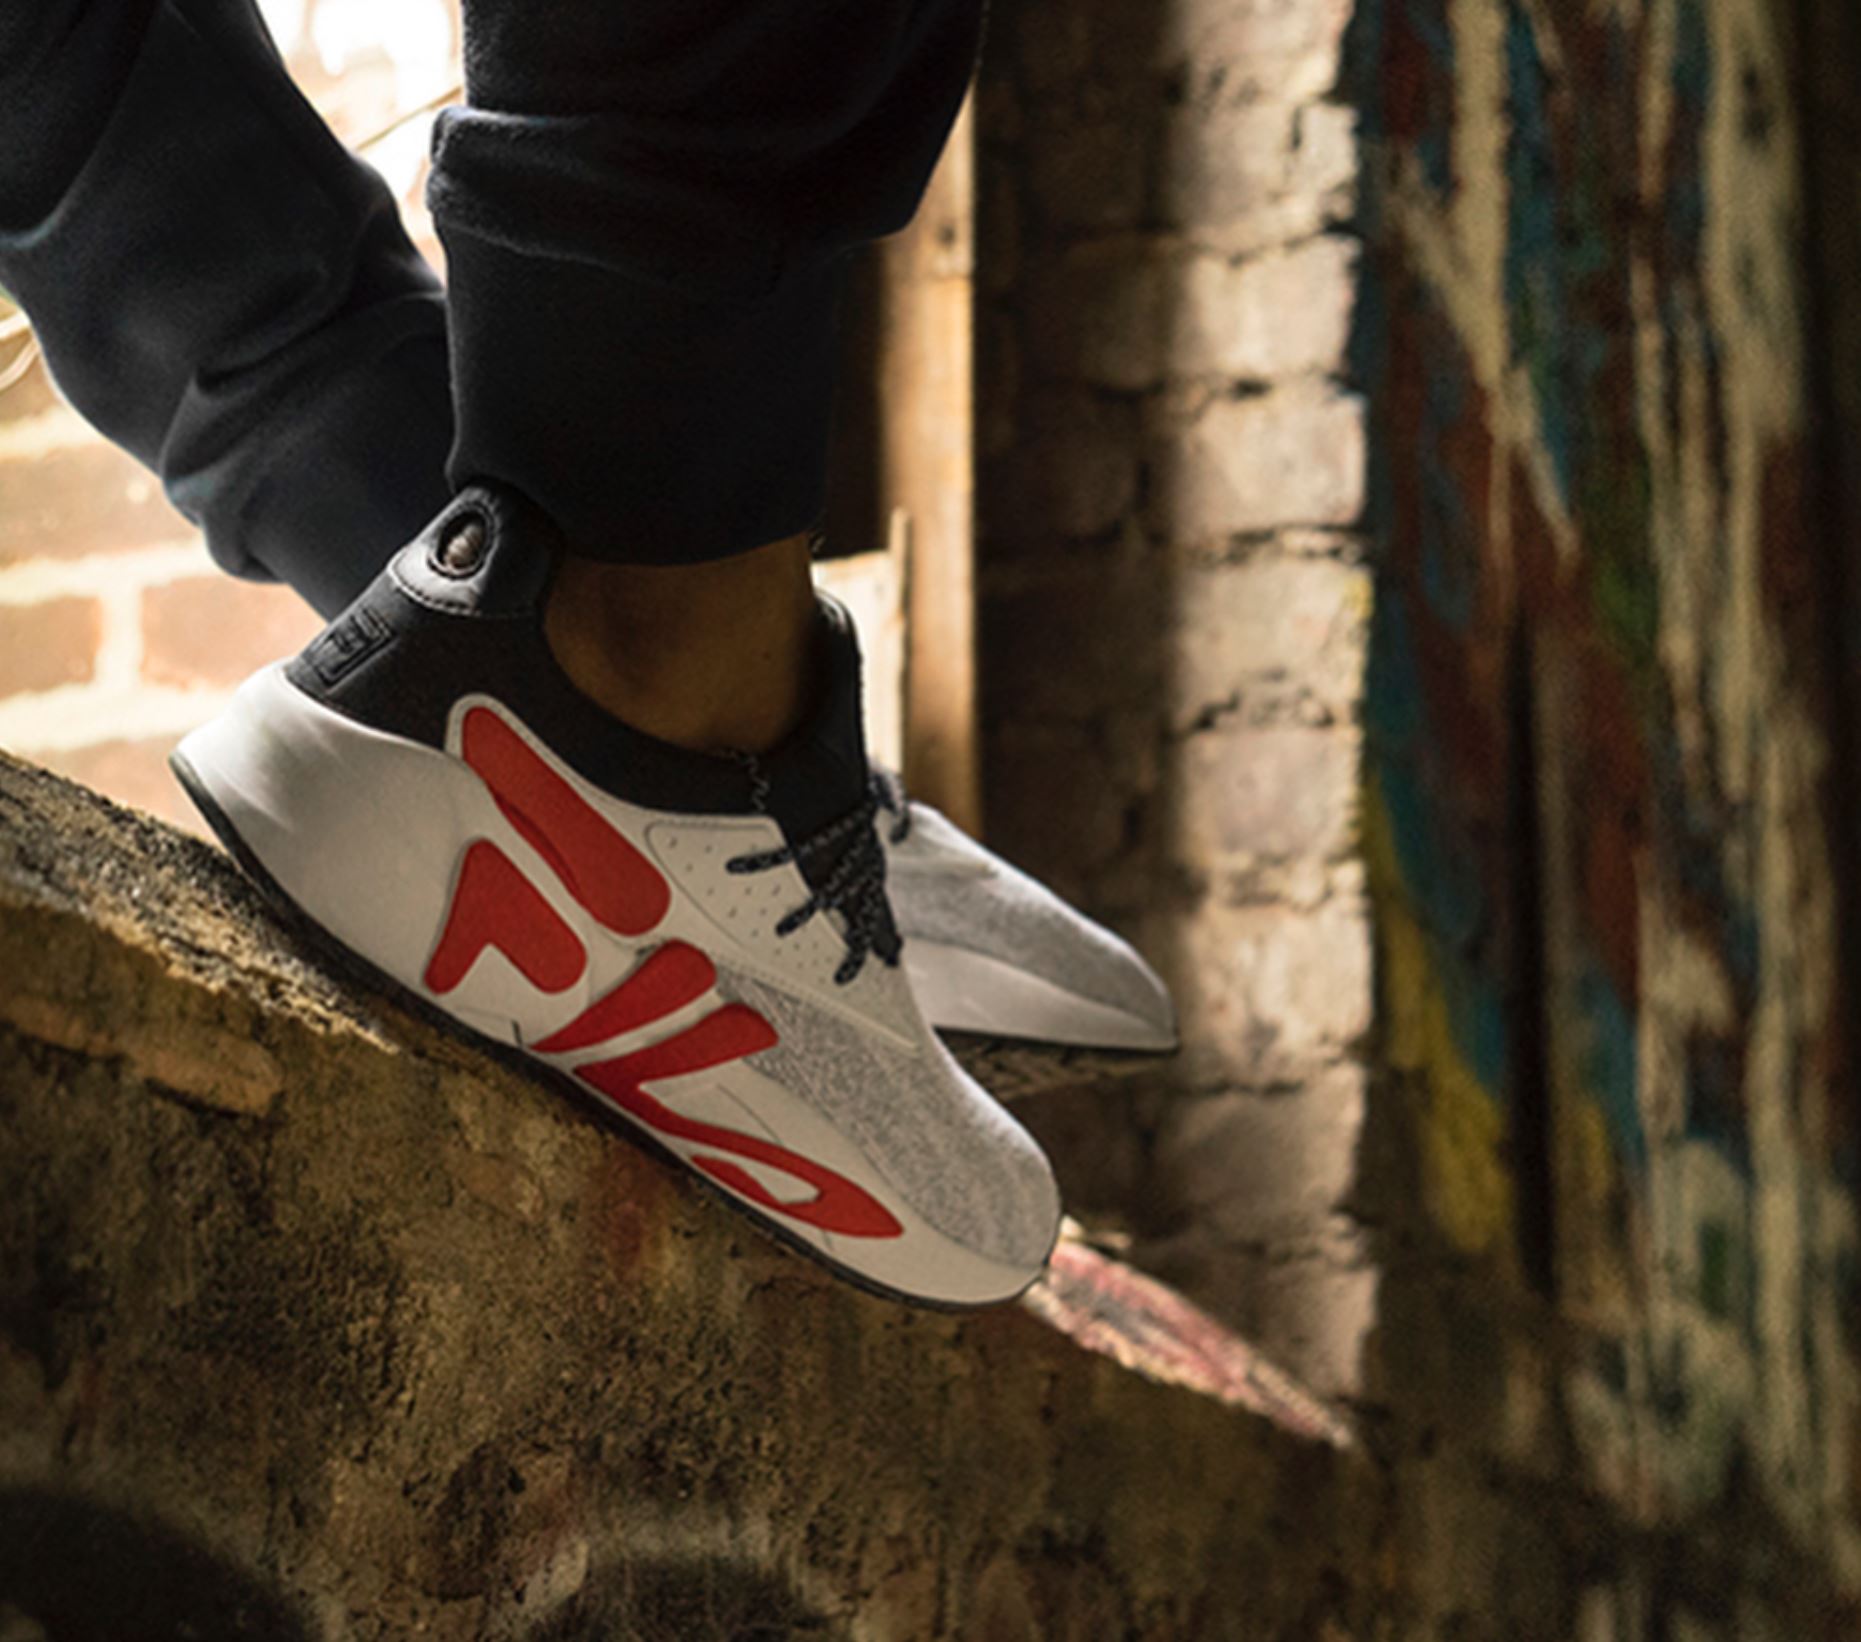 Tranquilidad veneno implícito The Fila Mindbreaker 2.0 is a Modern Build of the Mindblower - WearTesters